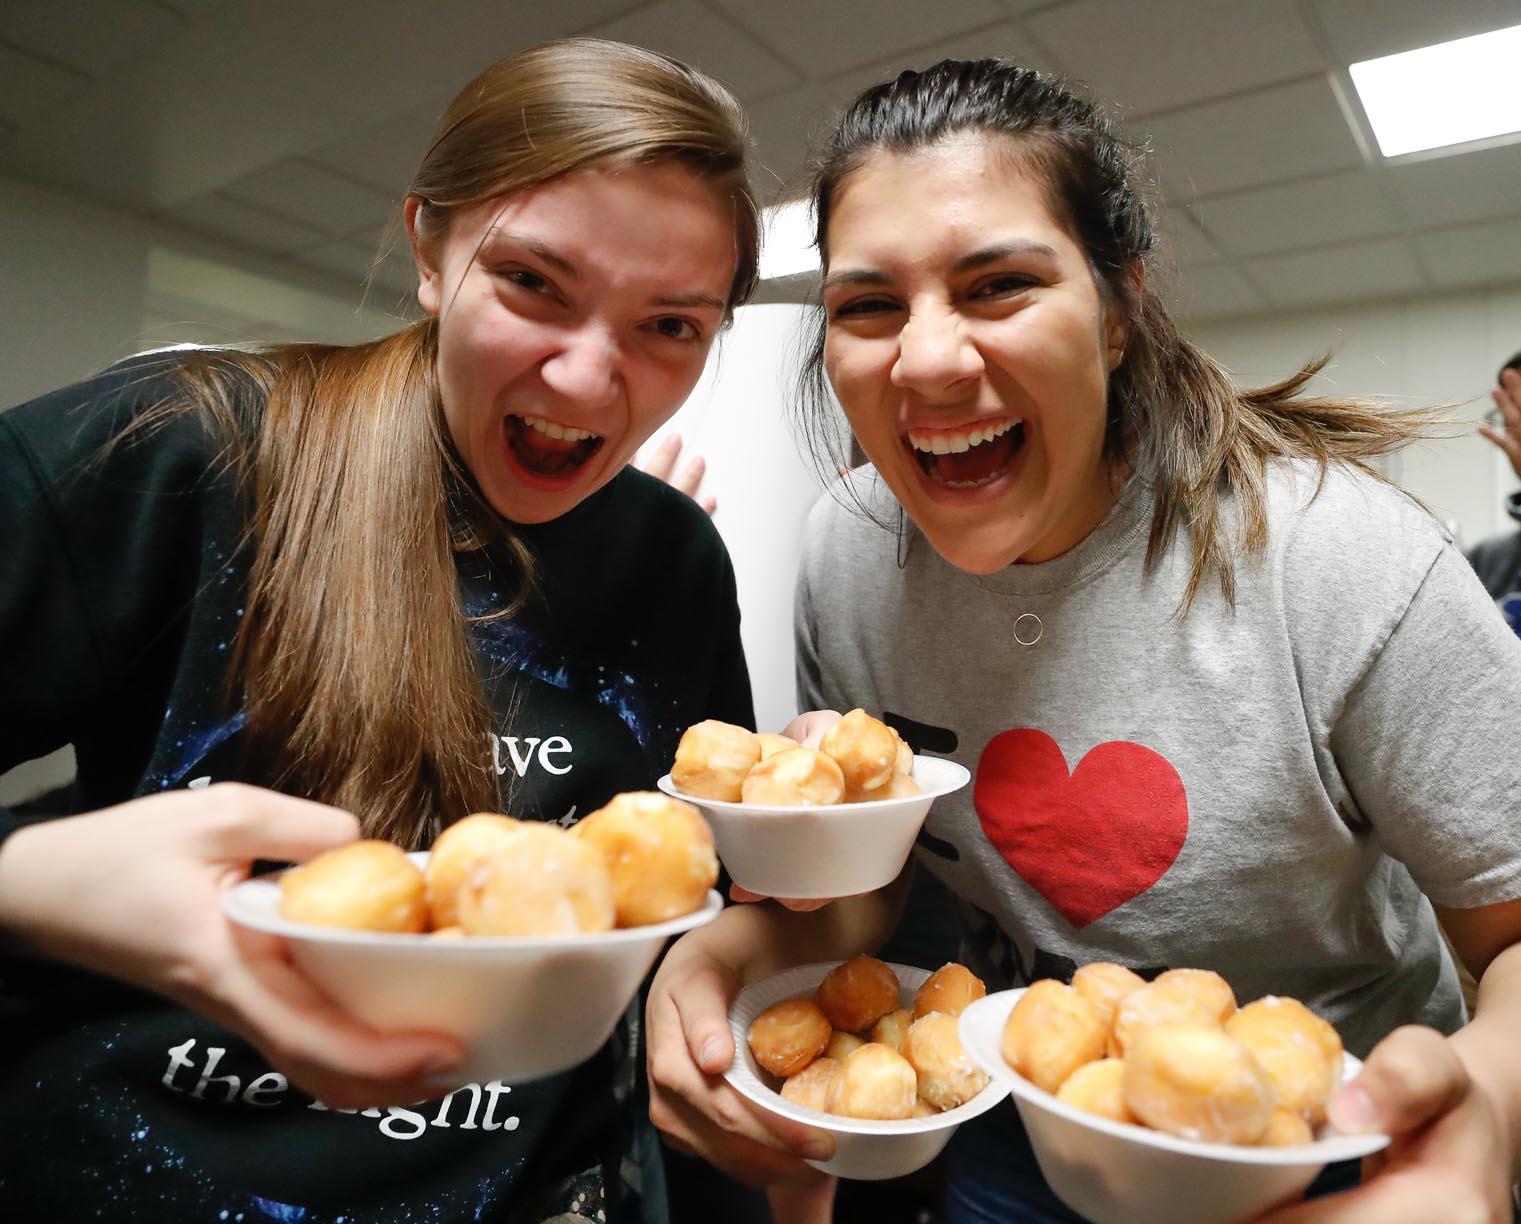 PHOTO GALLERY: Residence Life Community Assembly Night doughnut hole eating contest